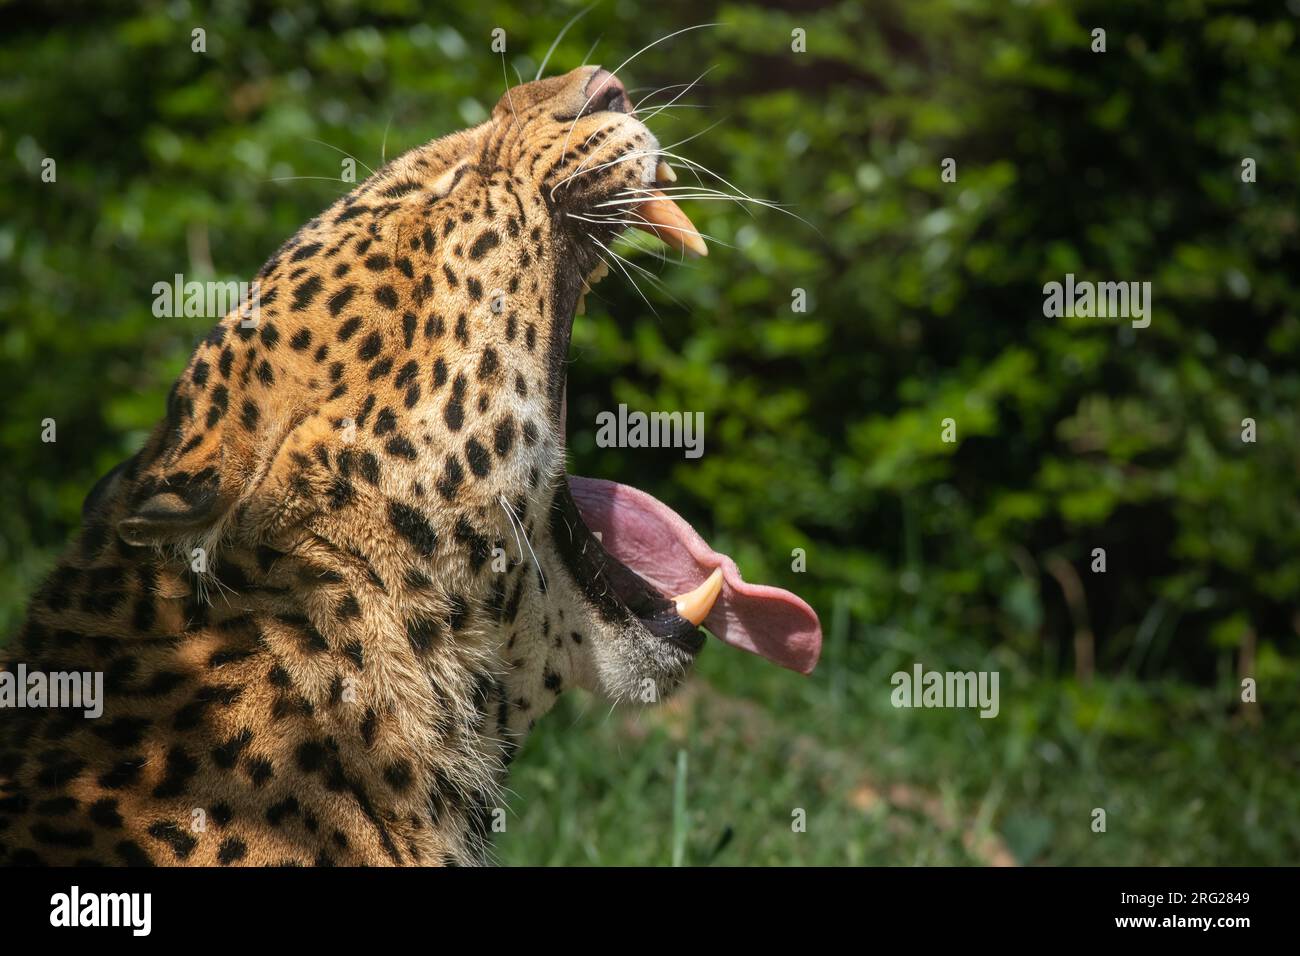 Yawning Javan Leopard Portrait in Zoo. Panthera Pardus Melas with Open Mouth in Zoological Garden. Stock Photo